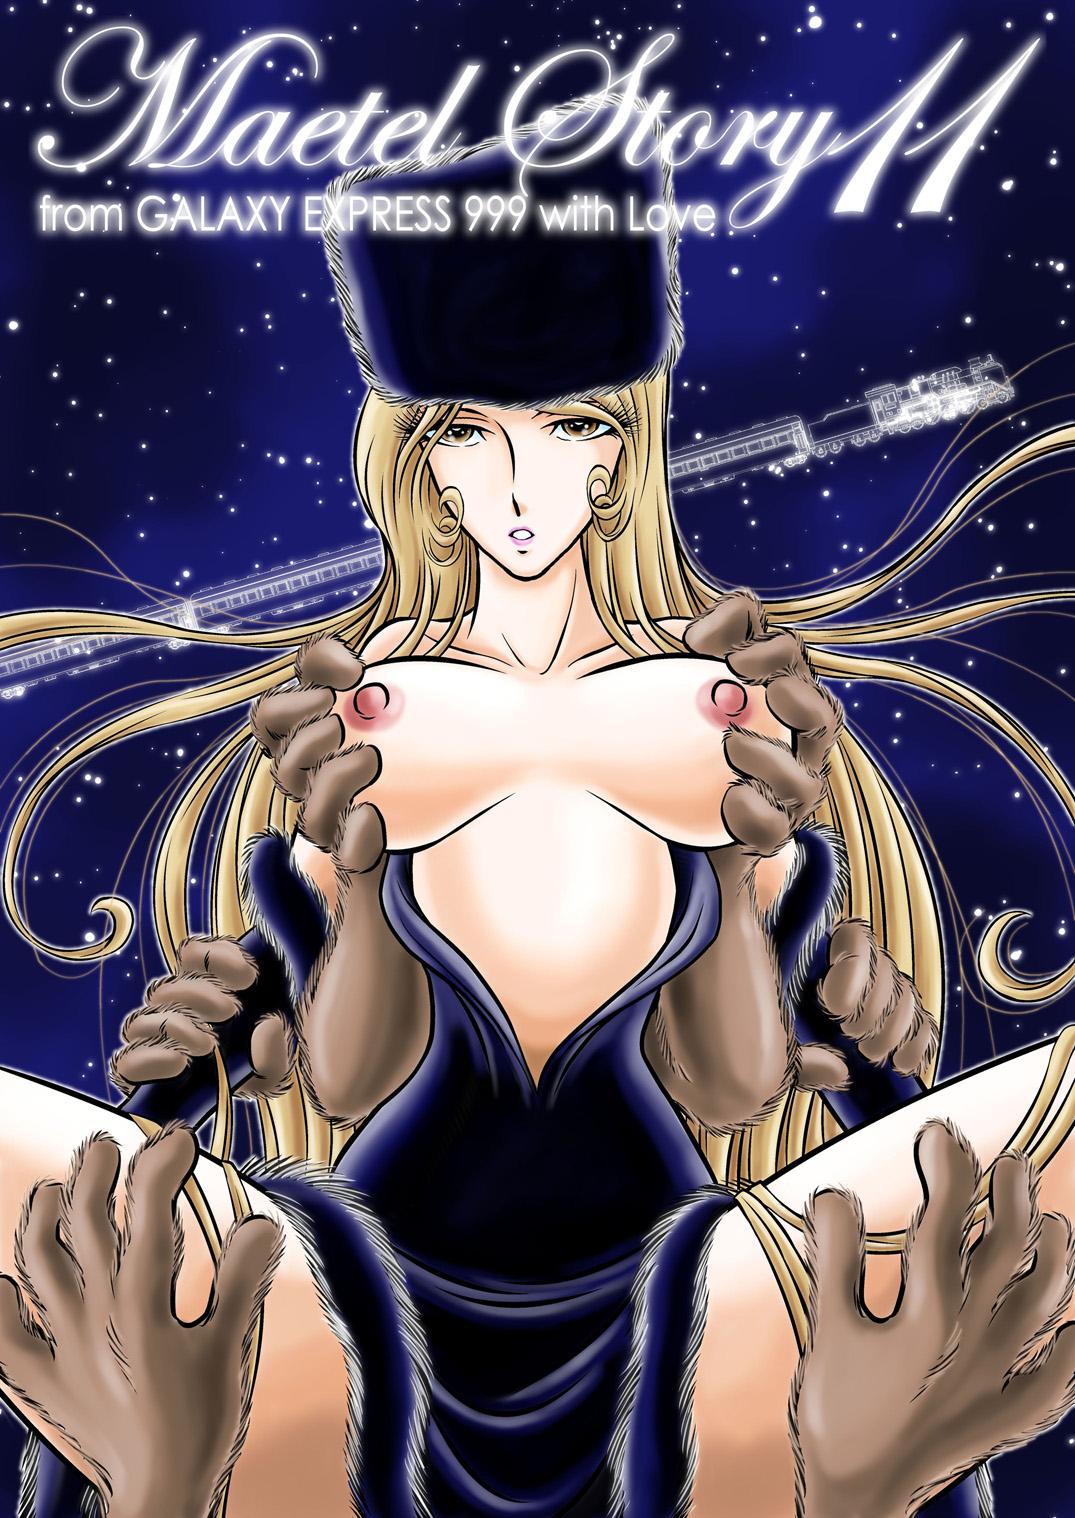 Cbt Maetel Story 11 - Galaxy express 999 Francais - Page 1